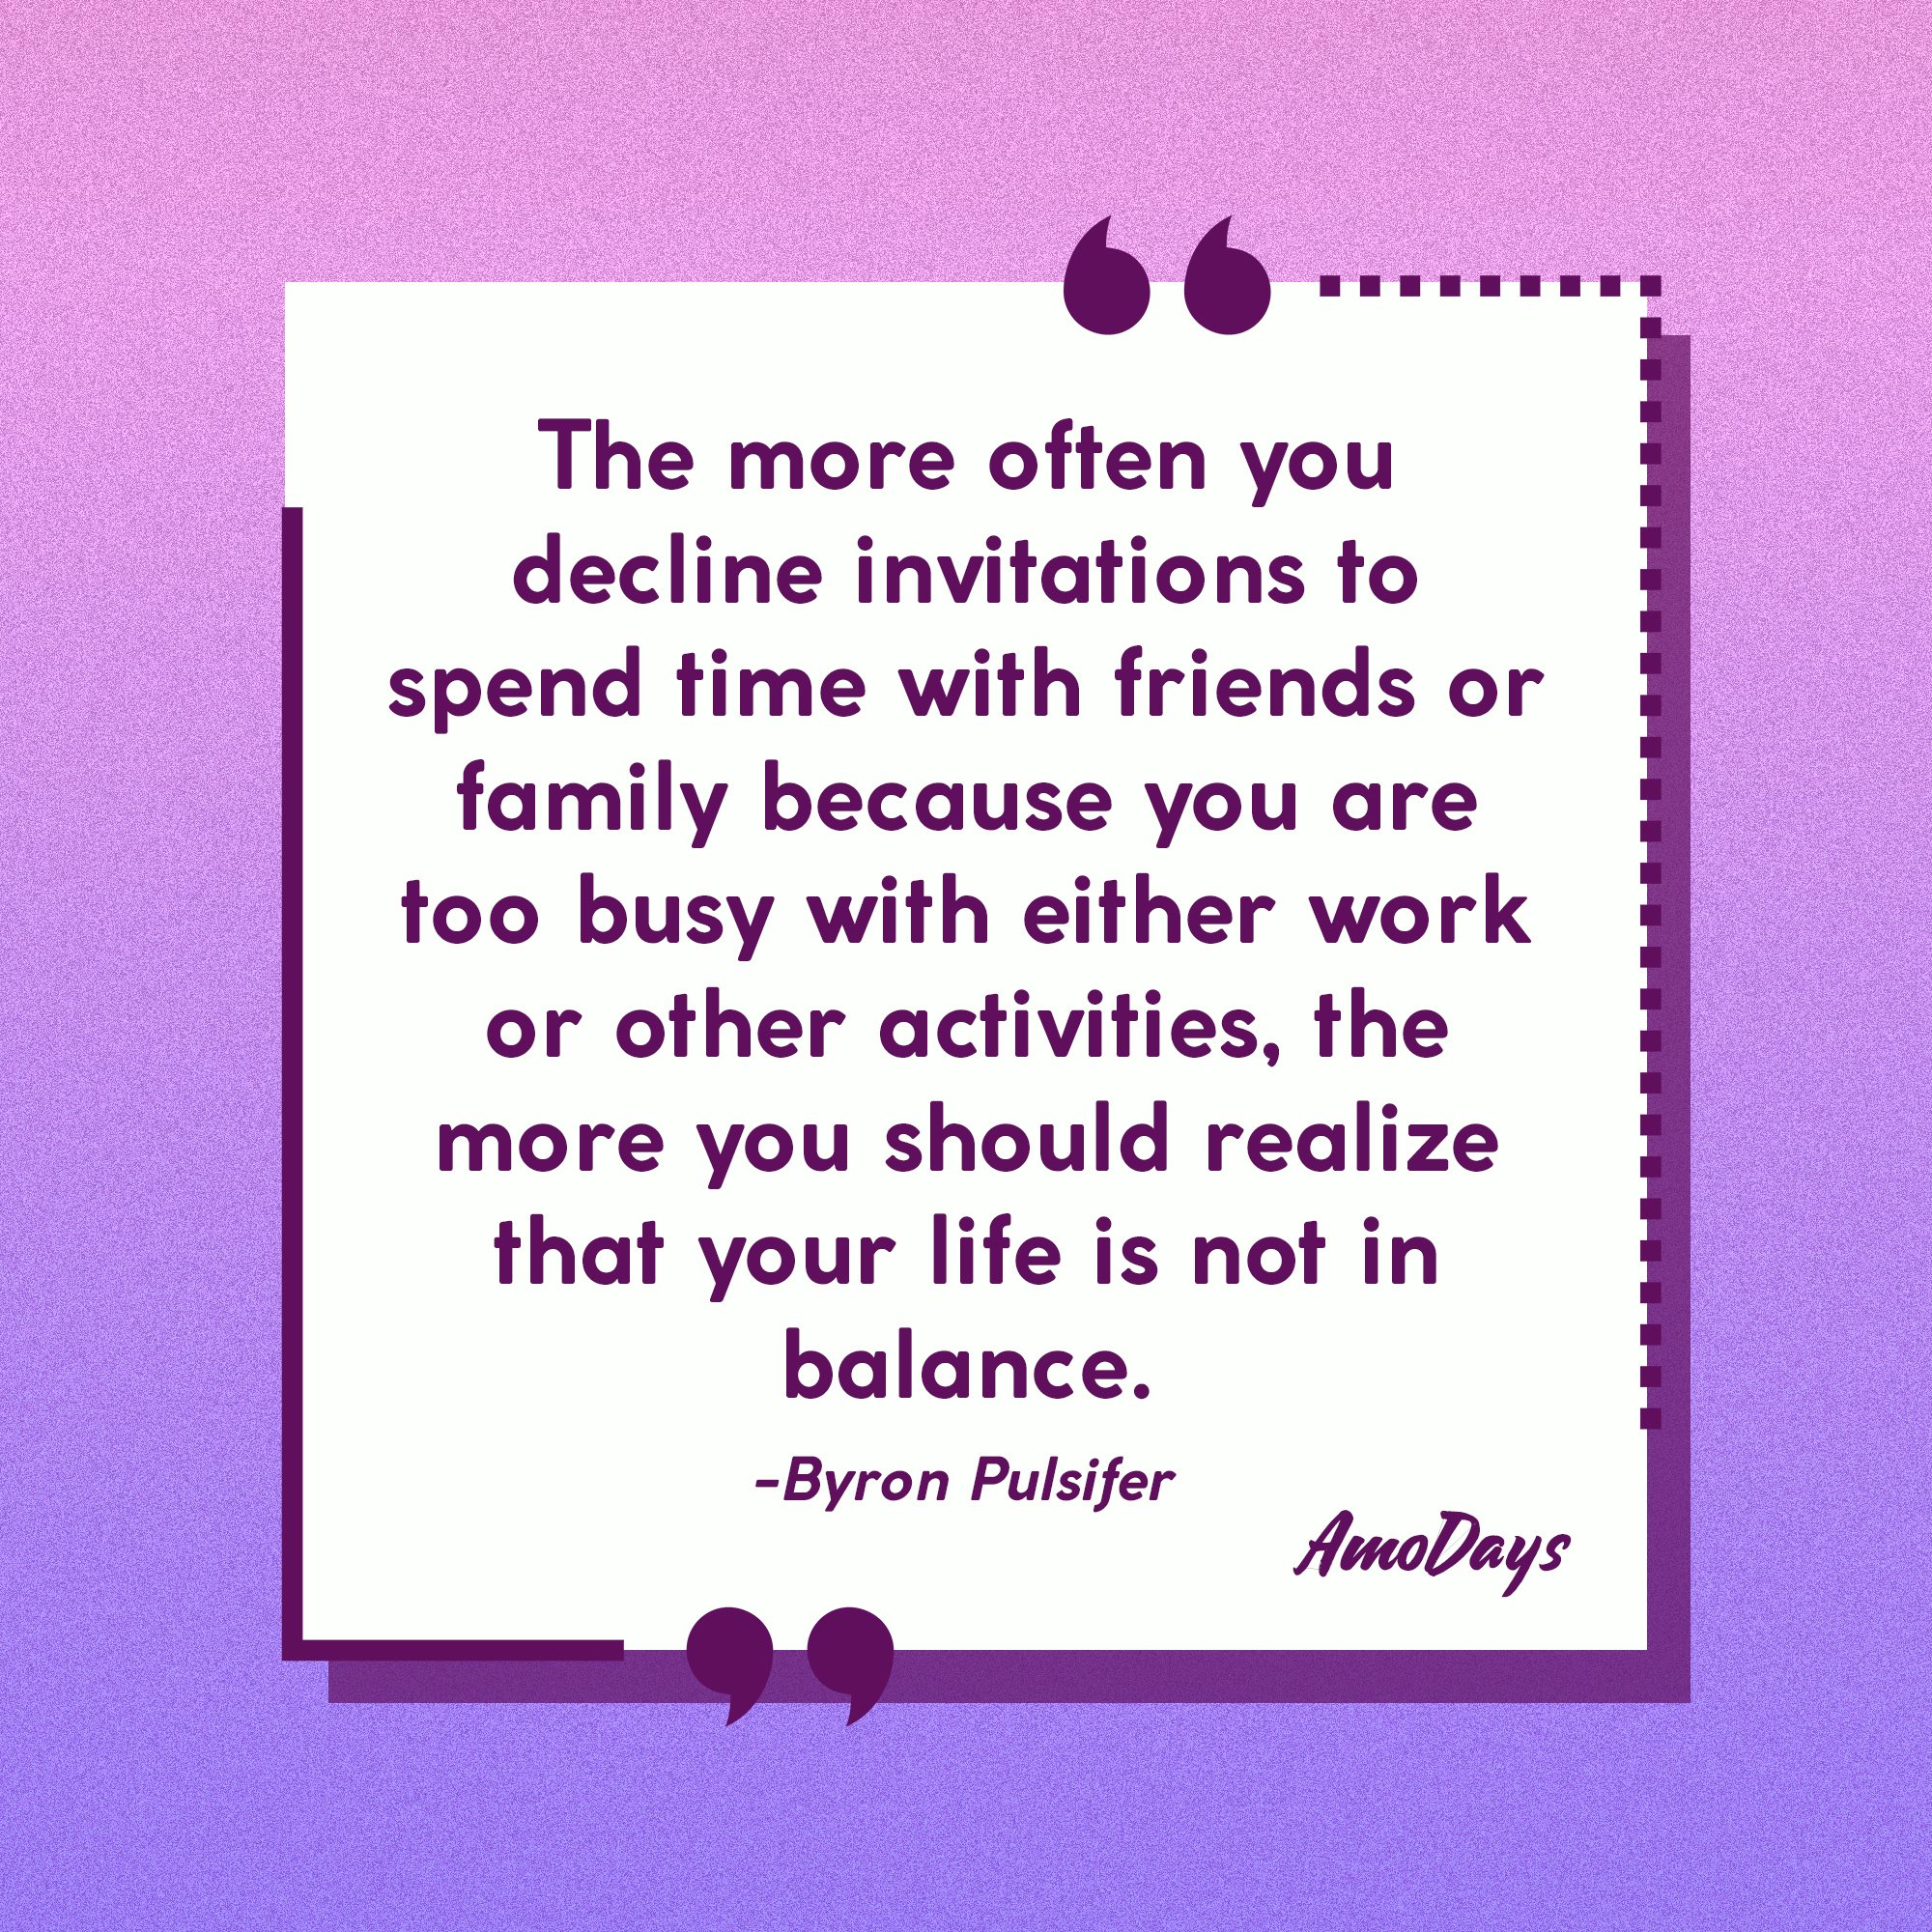  Byron Pulsifer's quote: "The more often you decline invitations to spend time with friends or family because you are too busy with either work or other activities, the more you should realize that your life is not in balance." | Image: Amodays